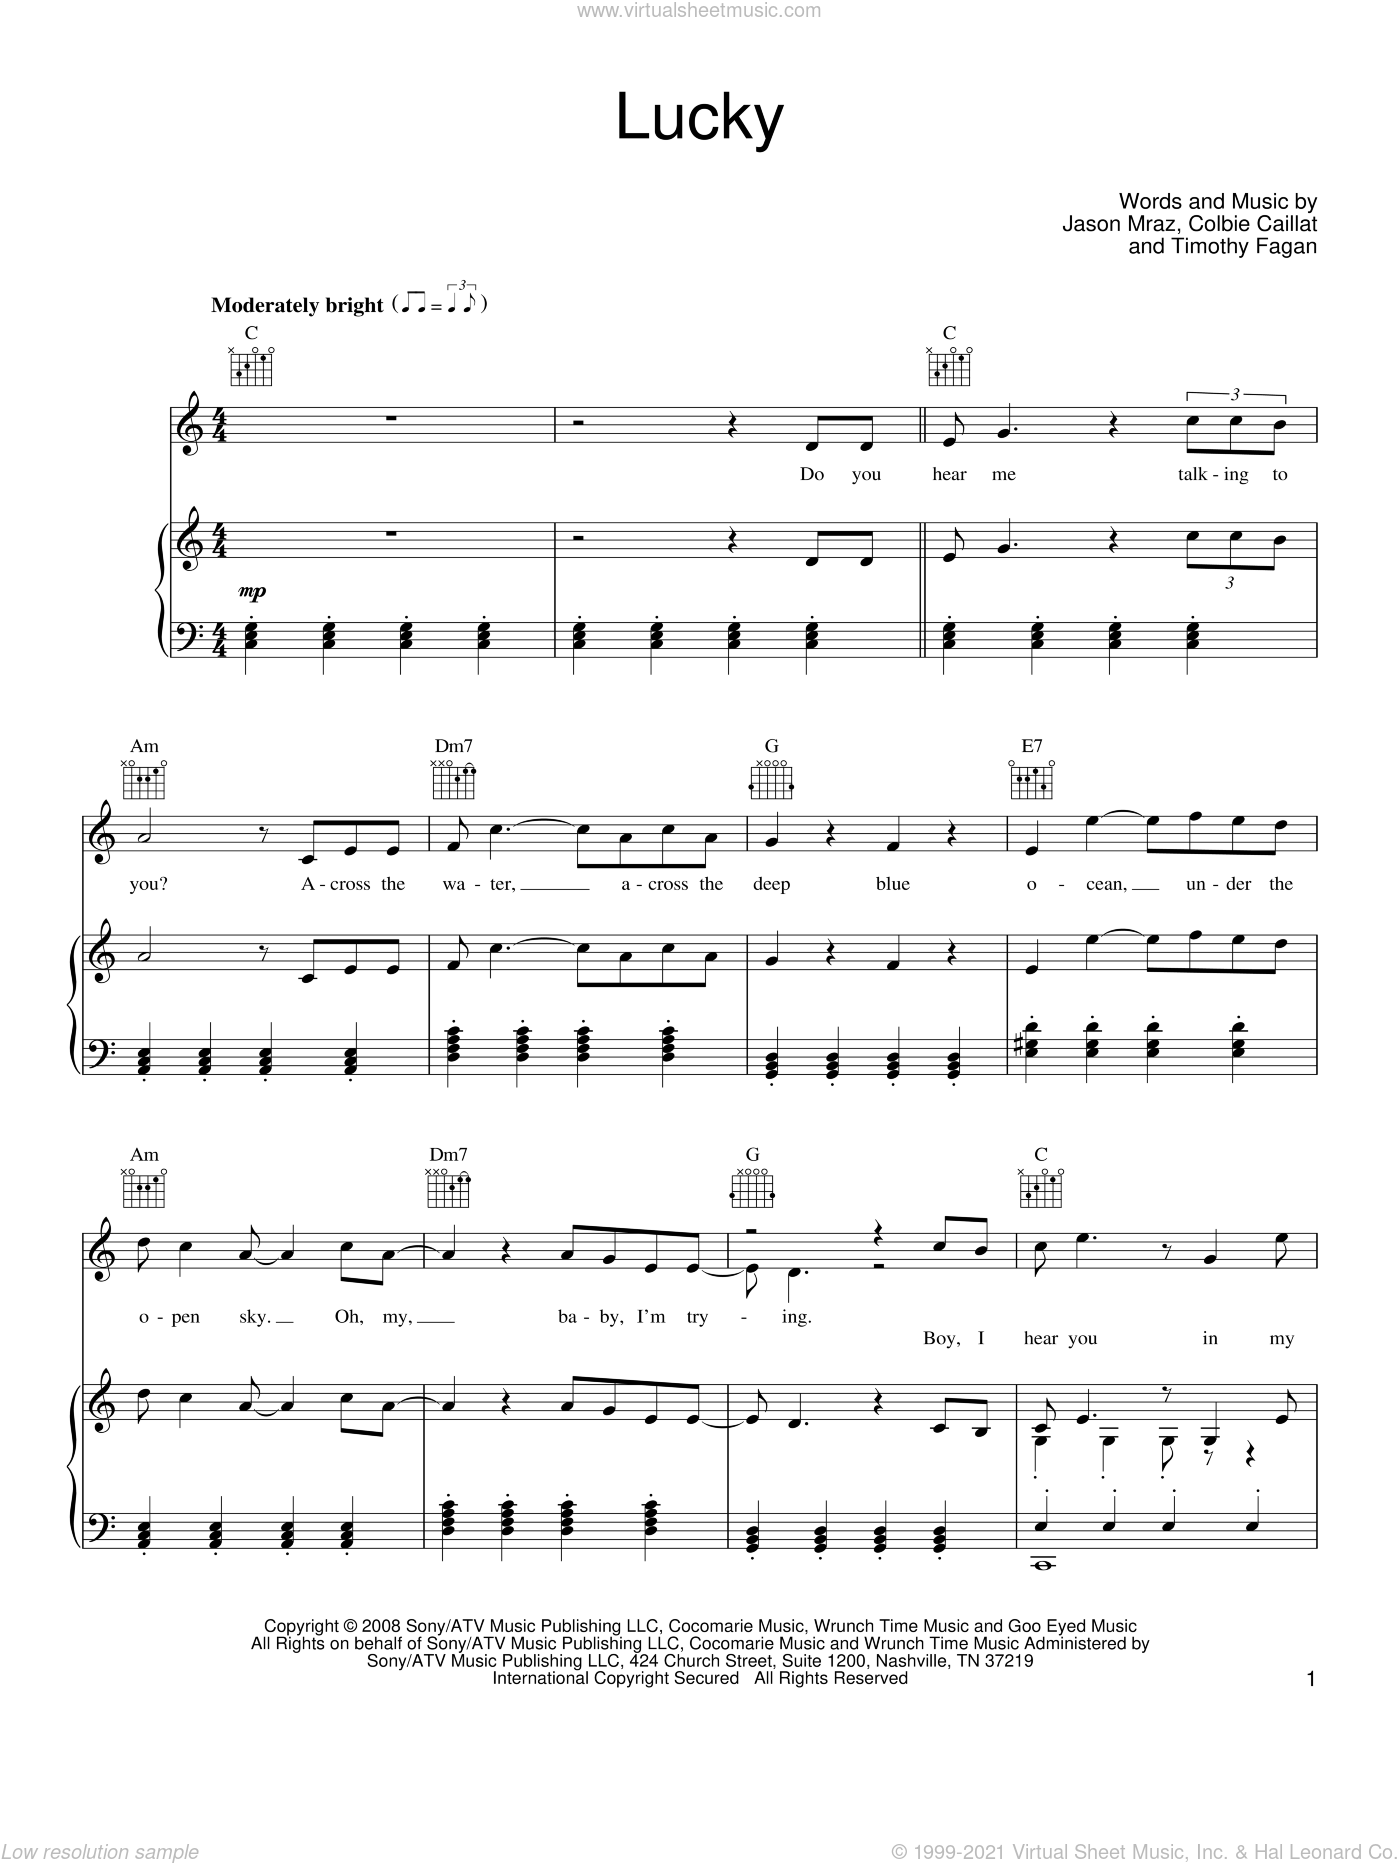 Weerkaatsing optocht video Jason Mraz & Colbie Caillat: Lucky sheet music for voice, piano or guitar